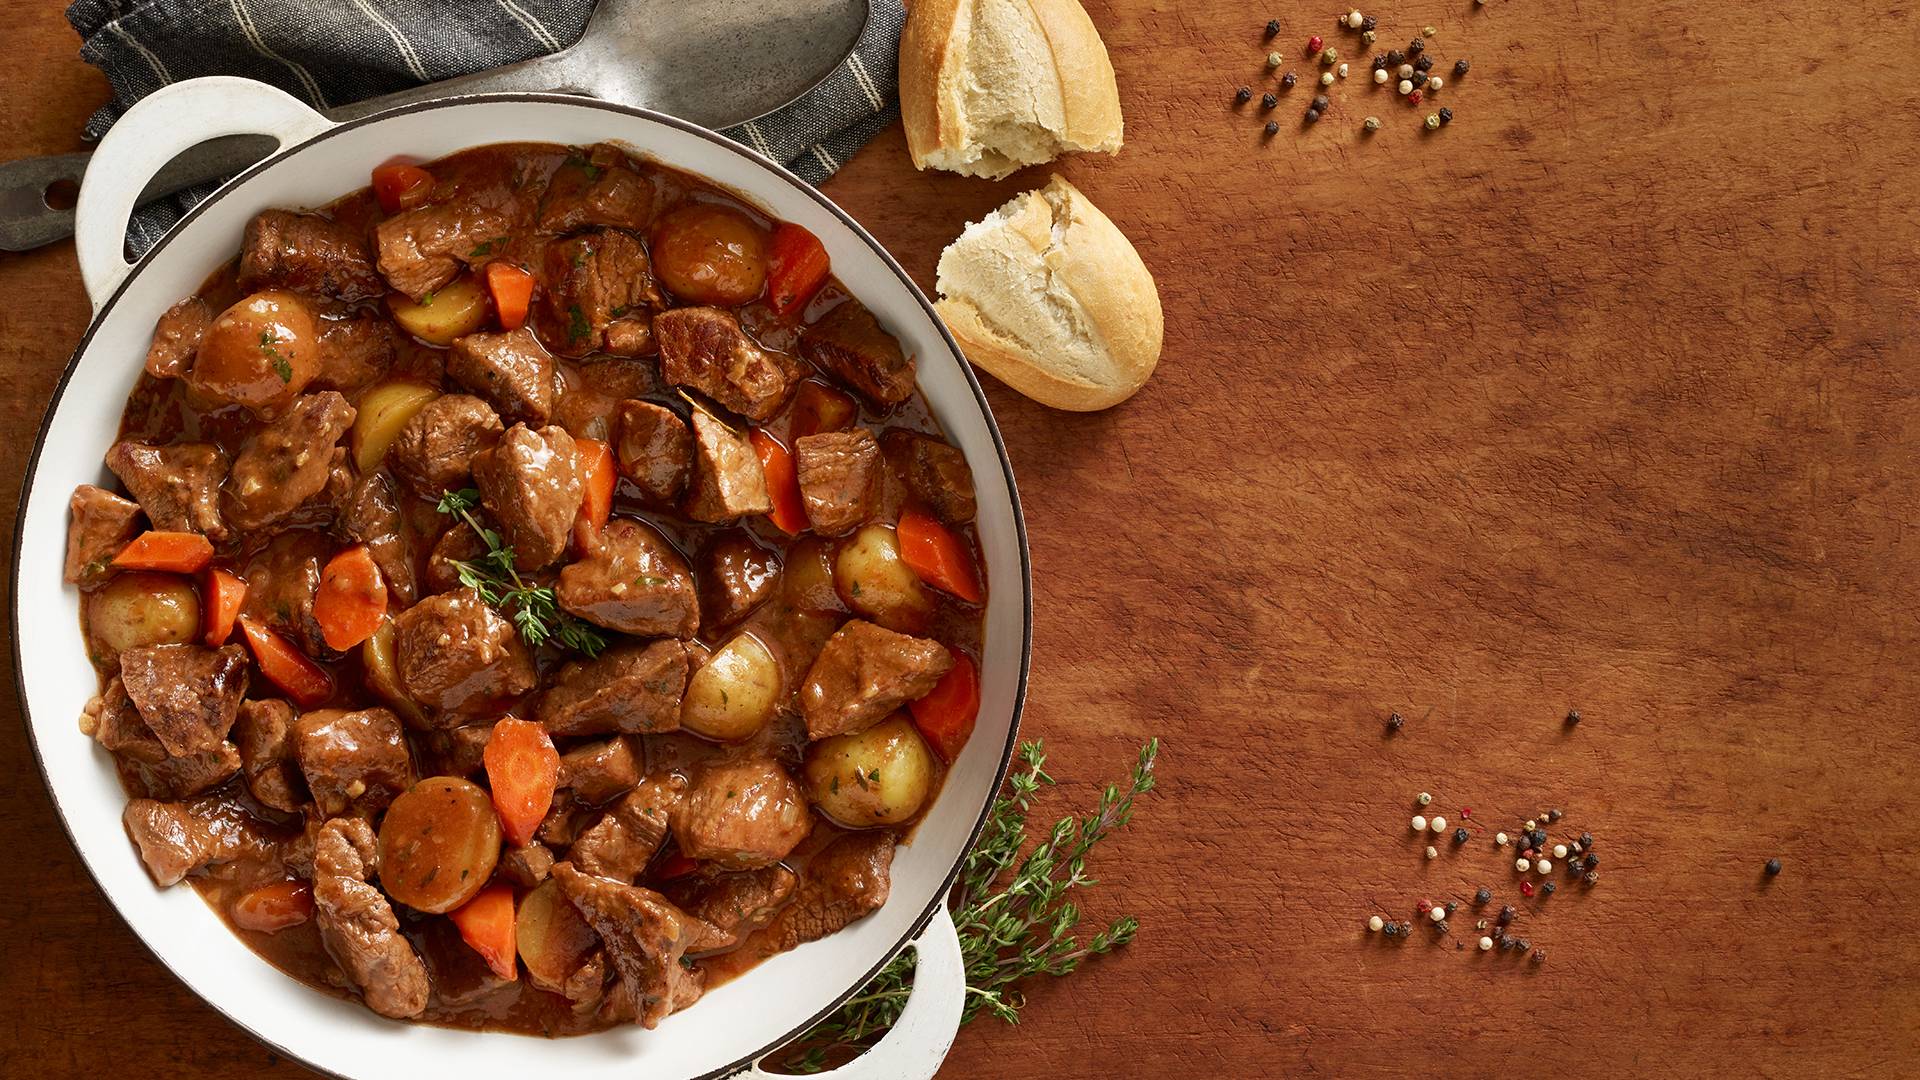 Beef Stew with bread and herbs